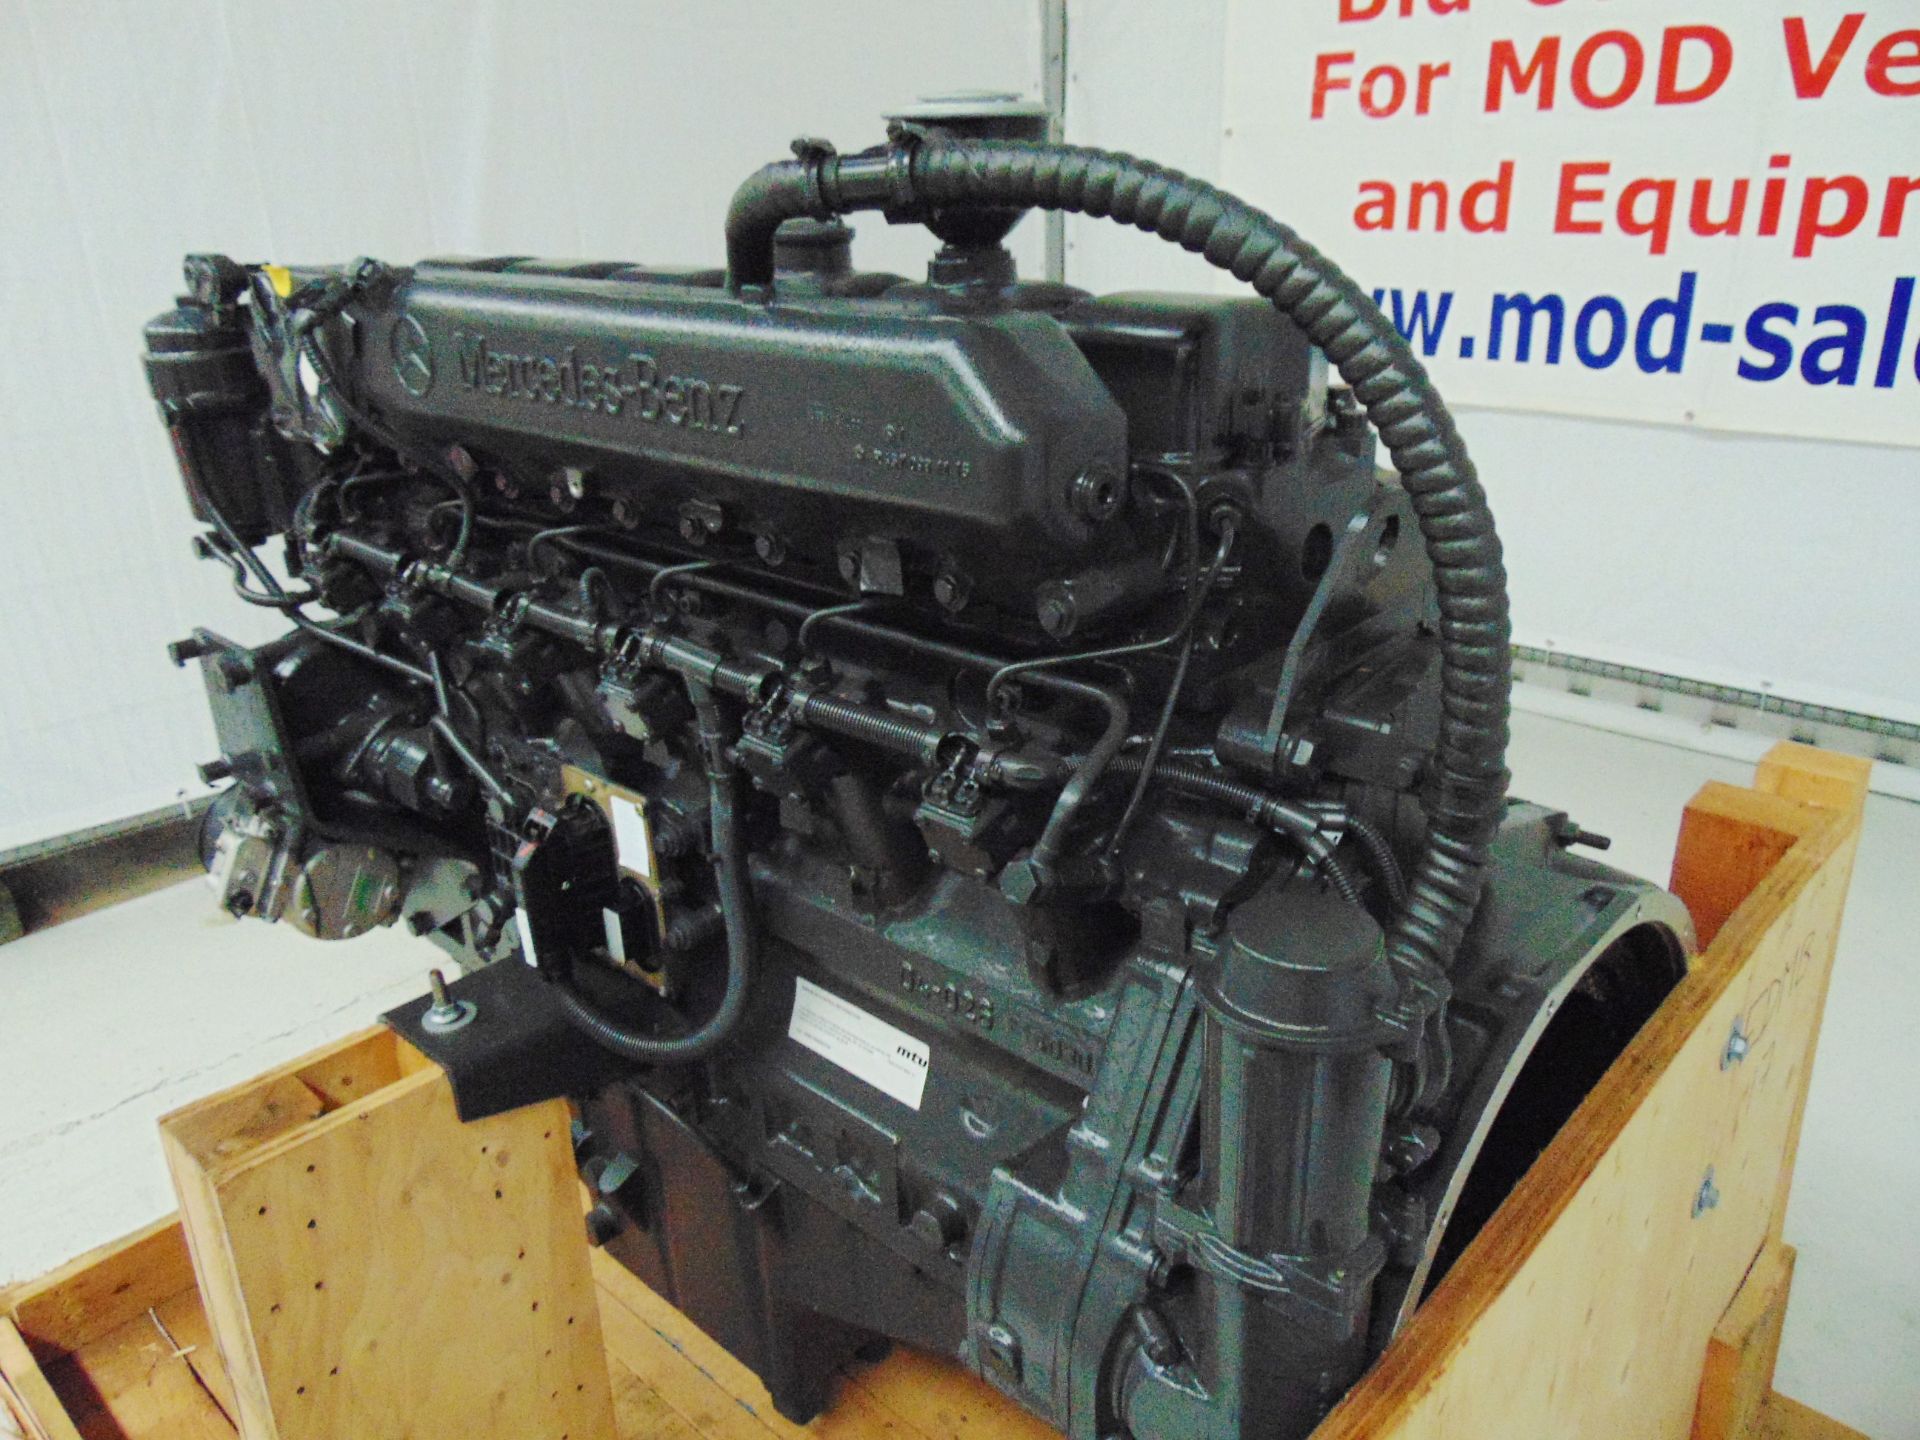 Factory Reconditioned Mercedes-Benz OM424 V12 Turbo Diesel Engine - Image 31 of 34